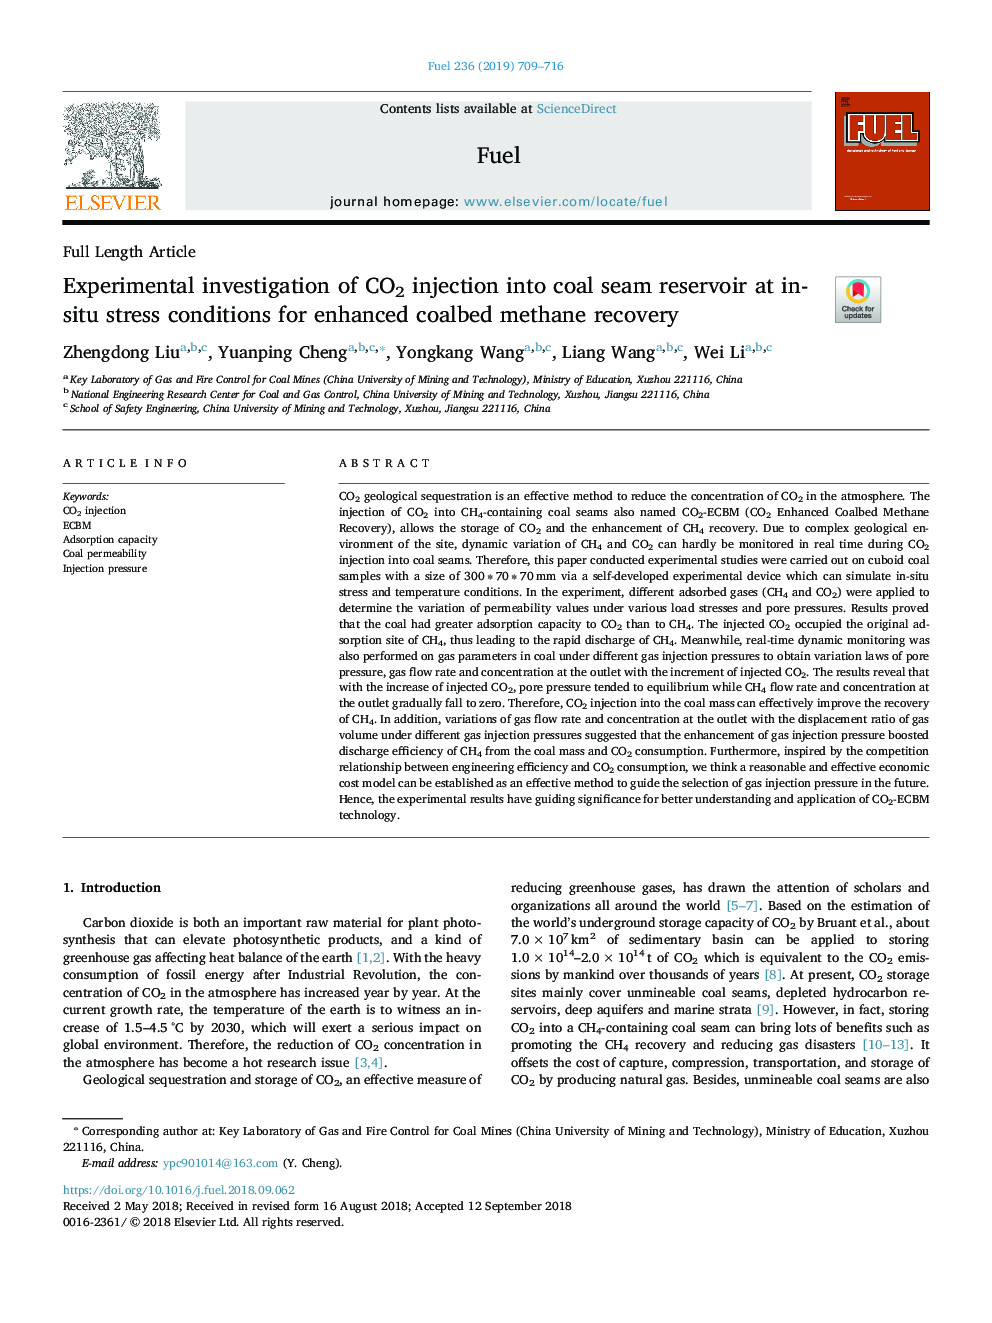 Experimental investigation of CO2 injection into coal seam reservoir at in-situ stress conditions for enhanced coalbed methane recovery